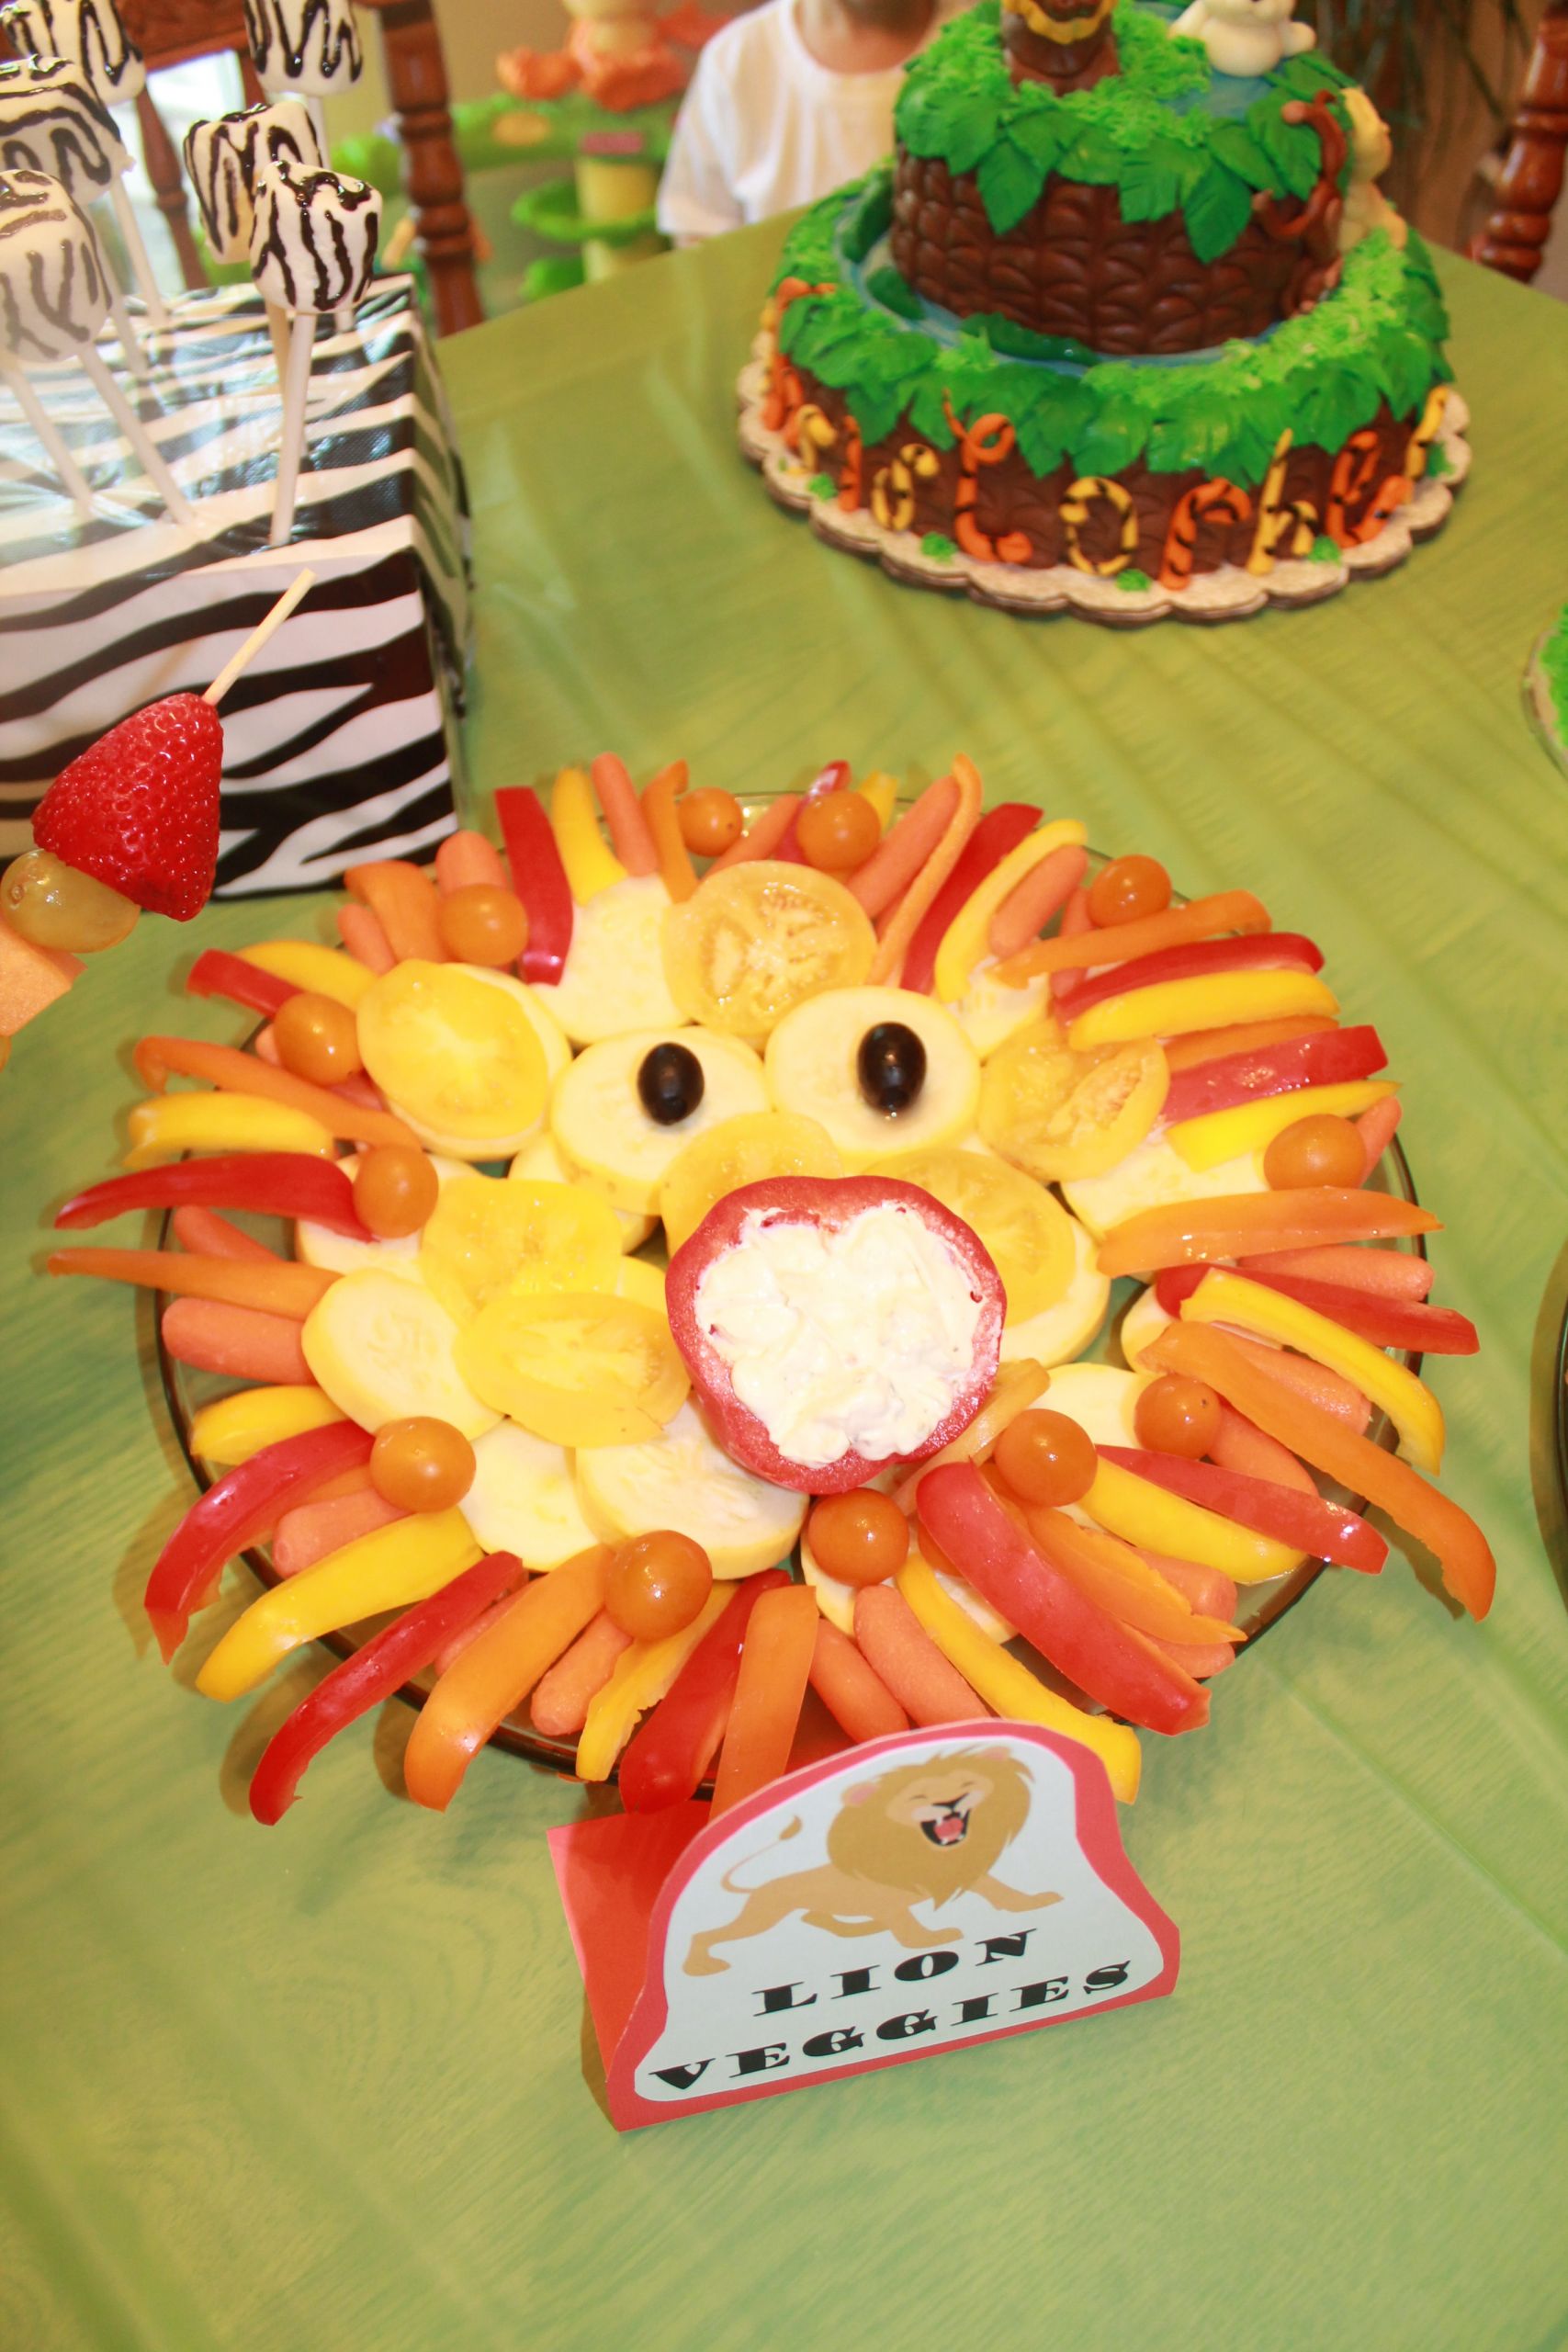 Zoo Birthday Party Food Ideas
 Lion veggie tray and other fabulous ideas for a zoo themed